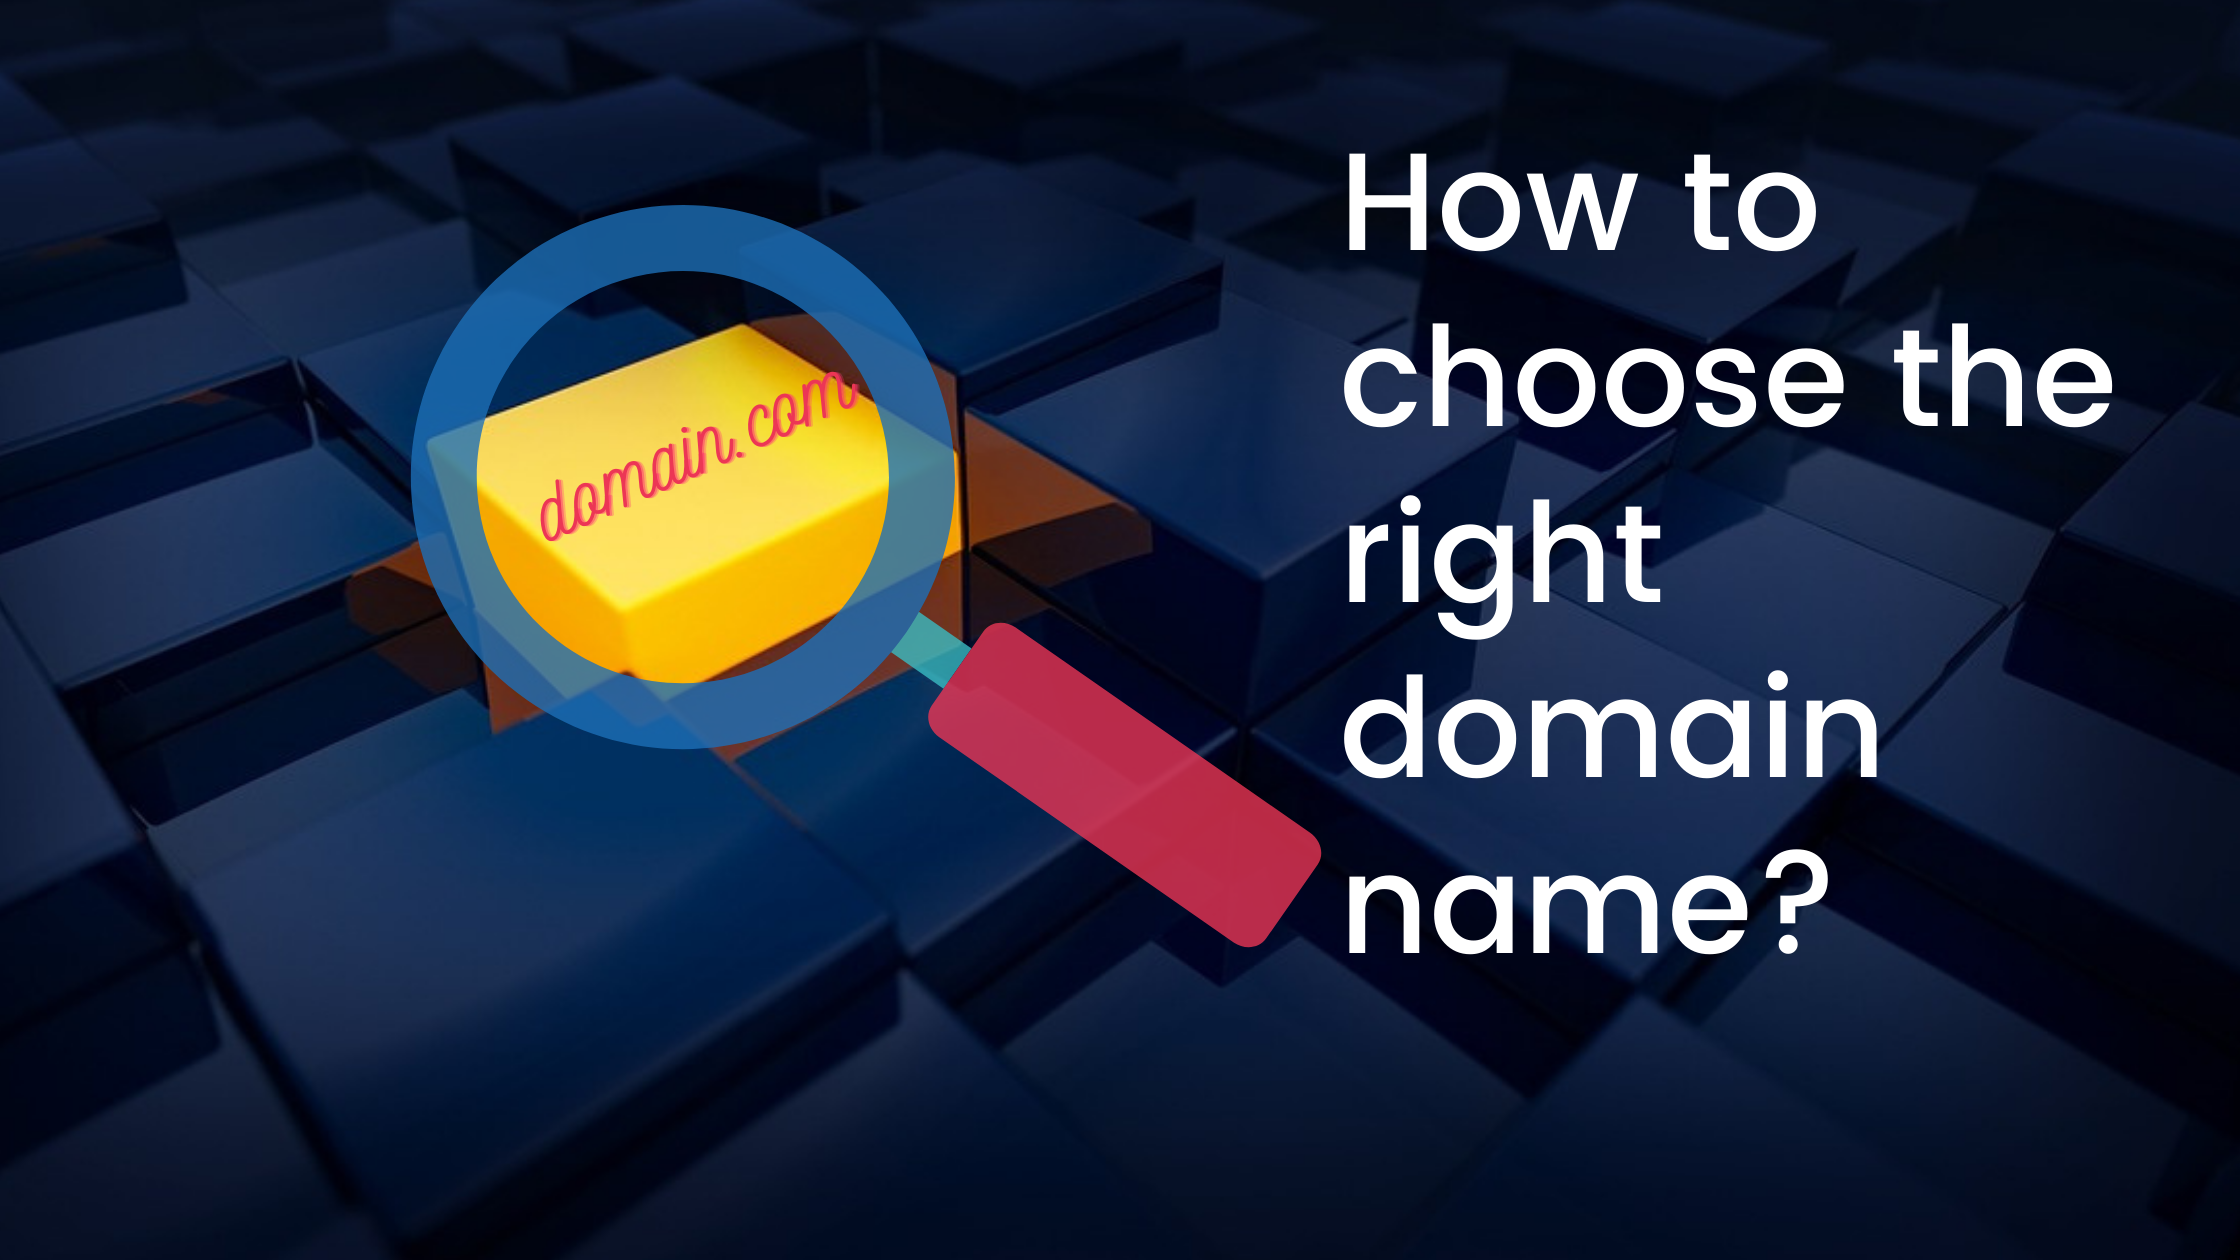 How to choose the right domain name